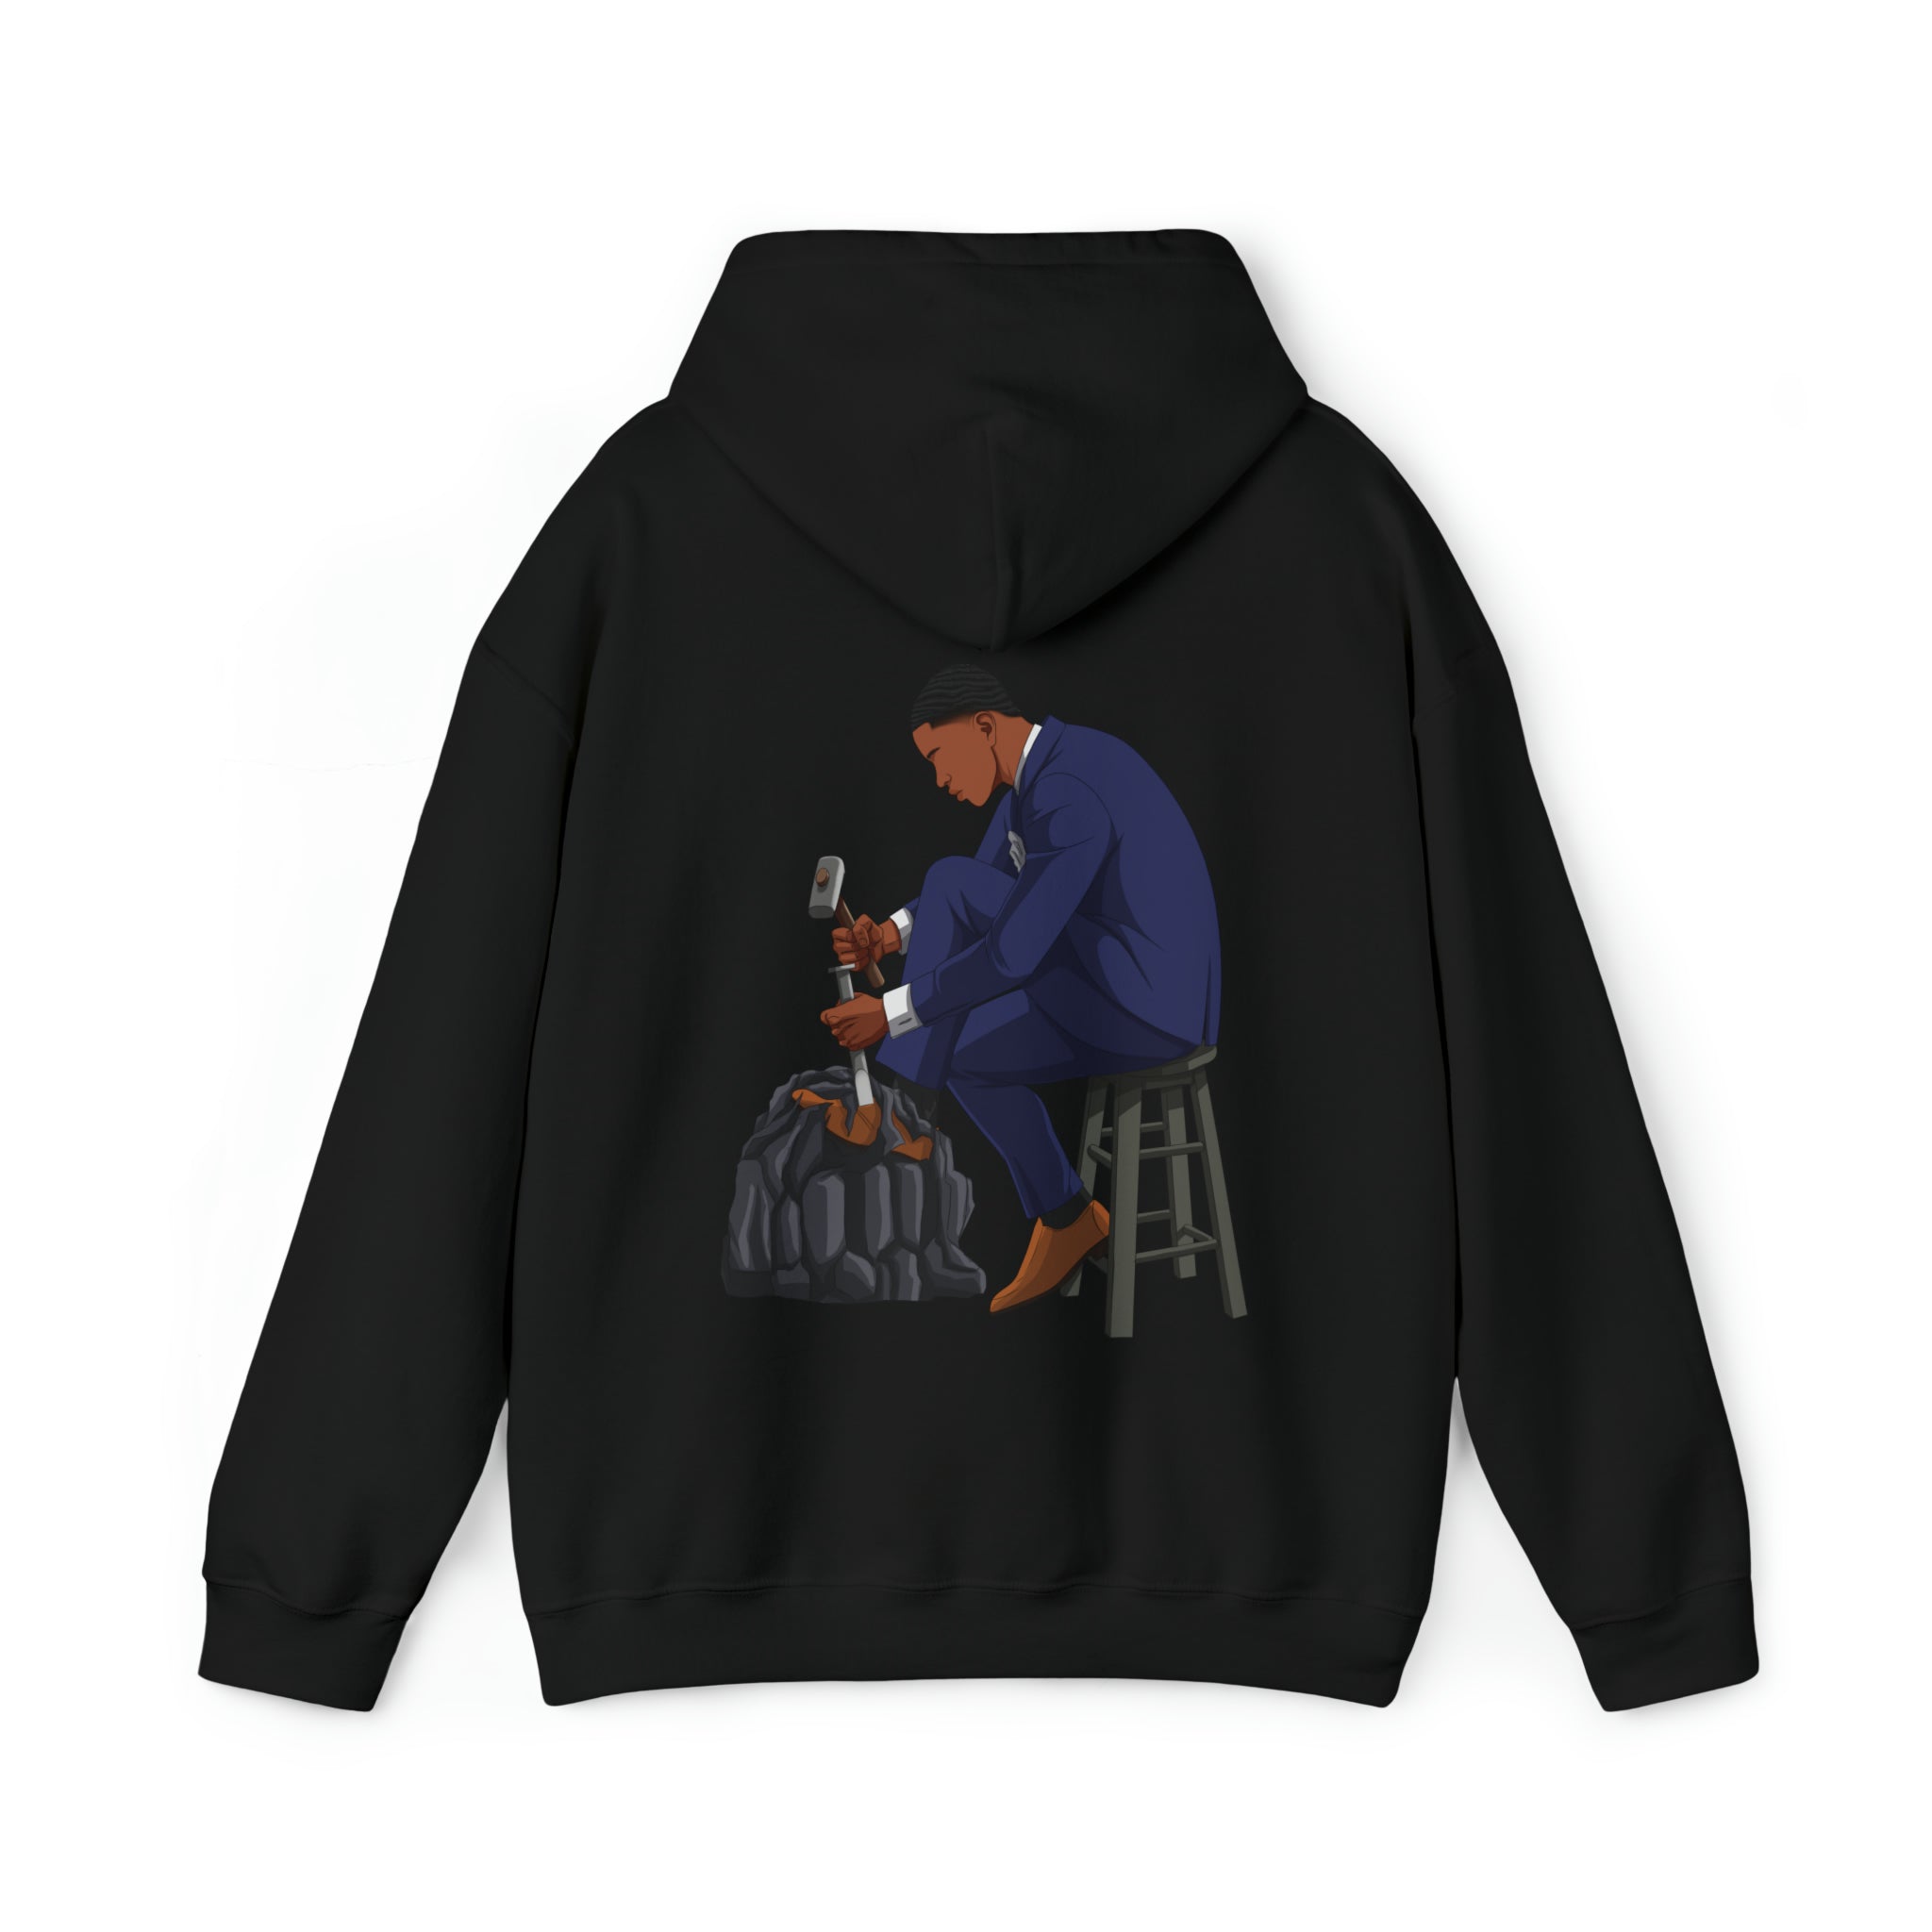 A person working hard to better his/herself - Heavy Blend™ Self-Made Hoodie - Man #11